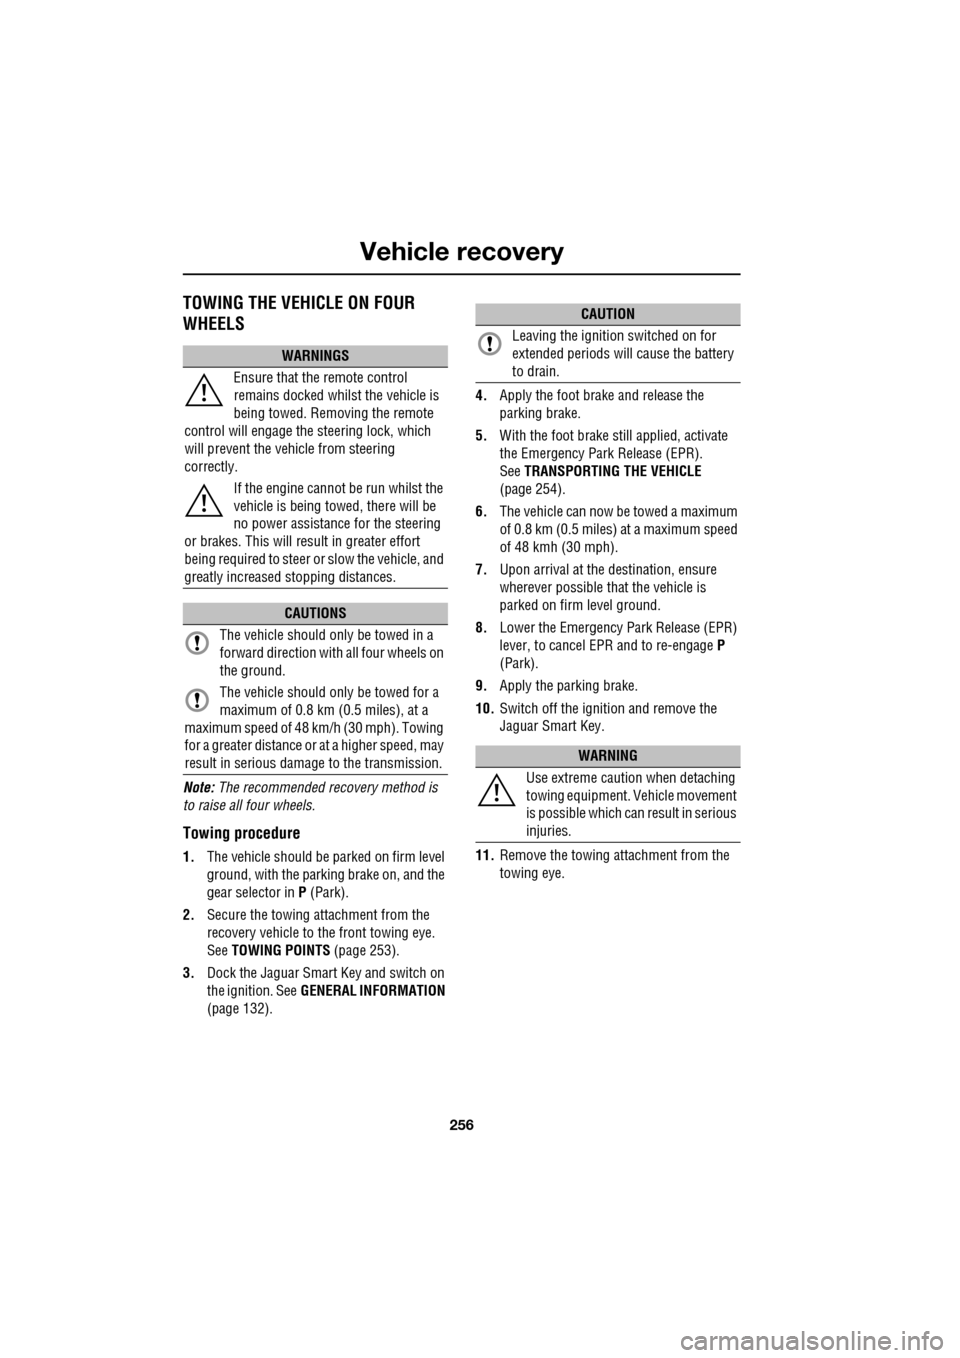 JAGUAR XF 2009 1.G Service Manual Vehicle recovery
256
               
TOWING THE VEHICLE ON FOUR 
WHEELS
Note: The recommended recovery method is 
to raise all four wheels.
Towing procedure
1. The vehicle should be parked on firm lev